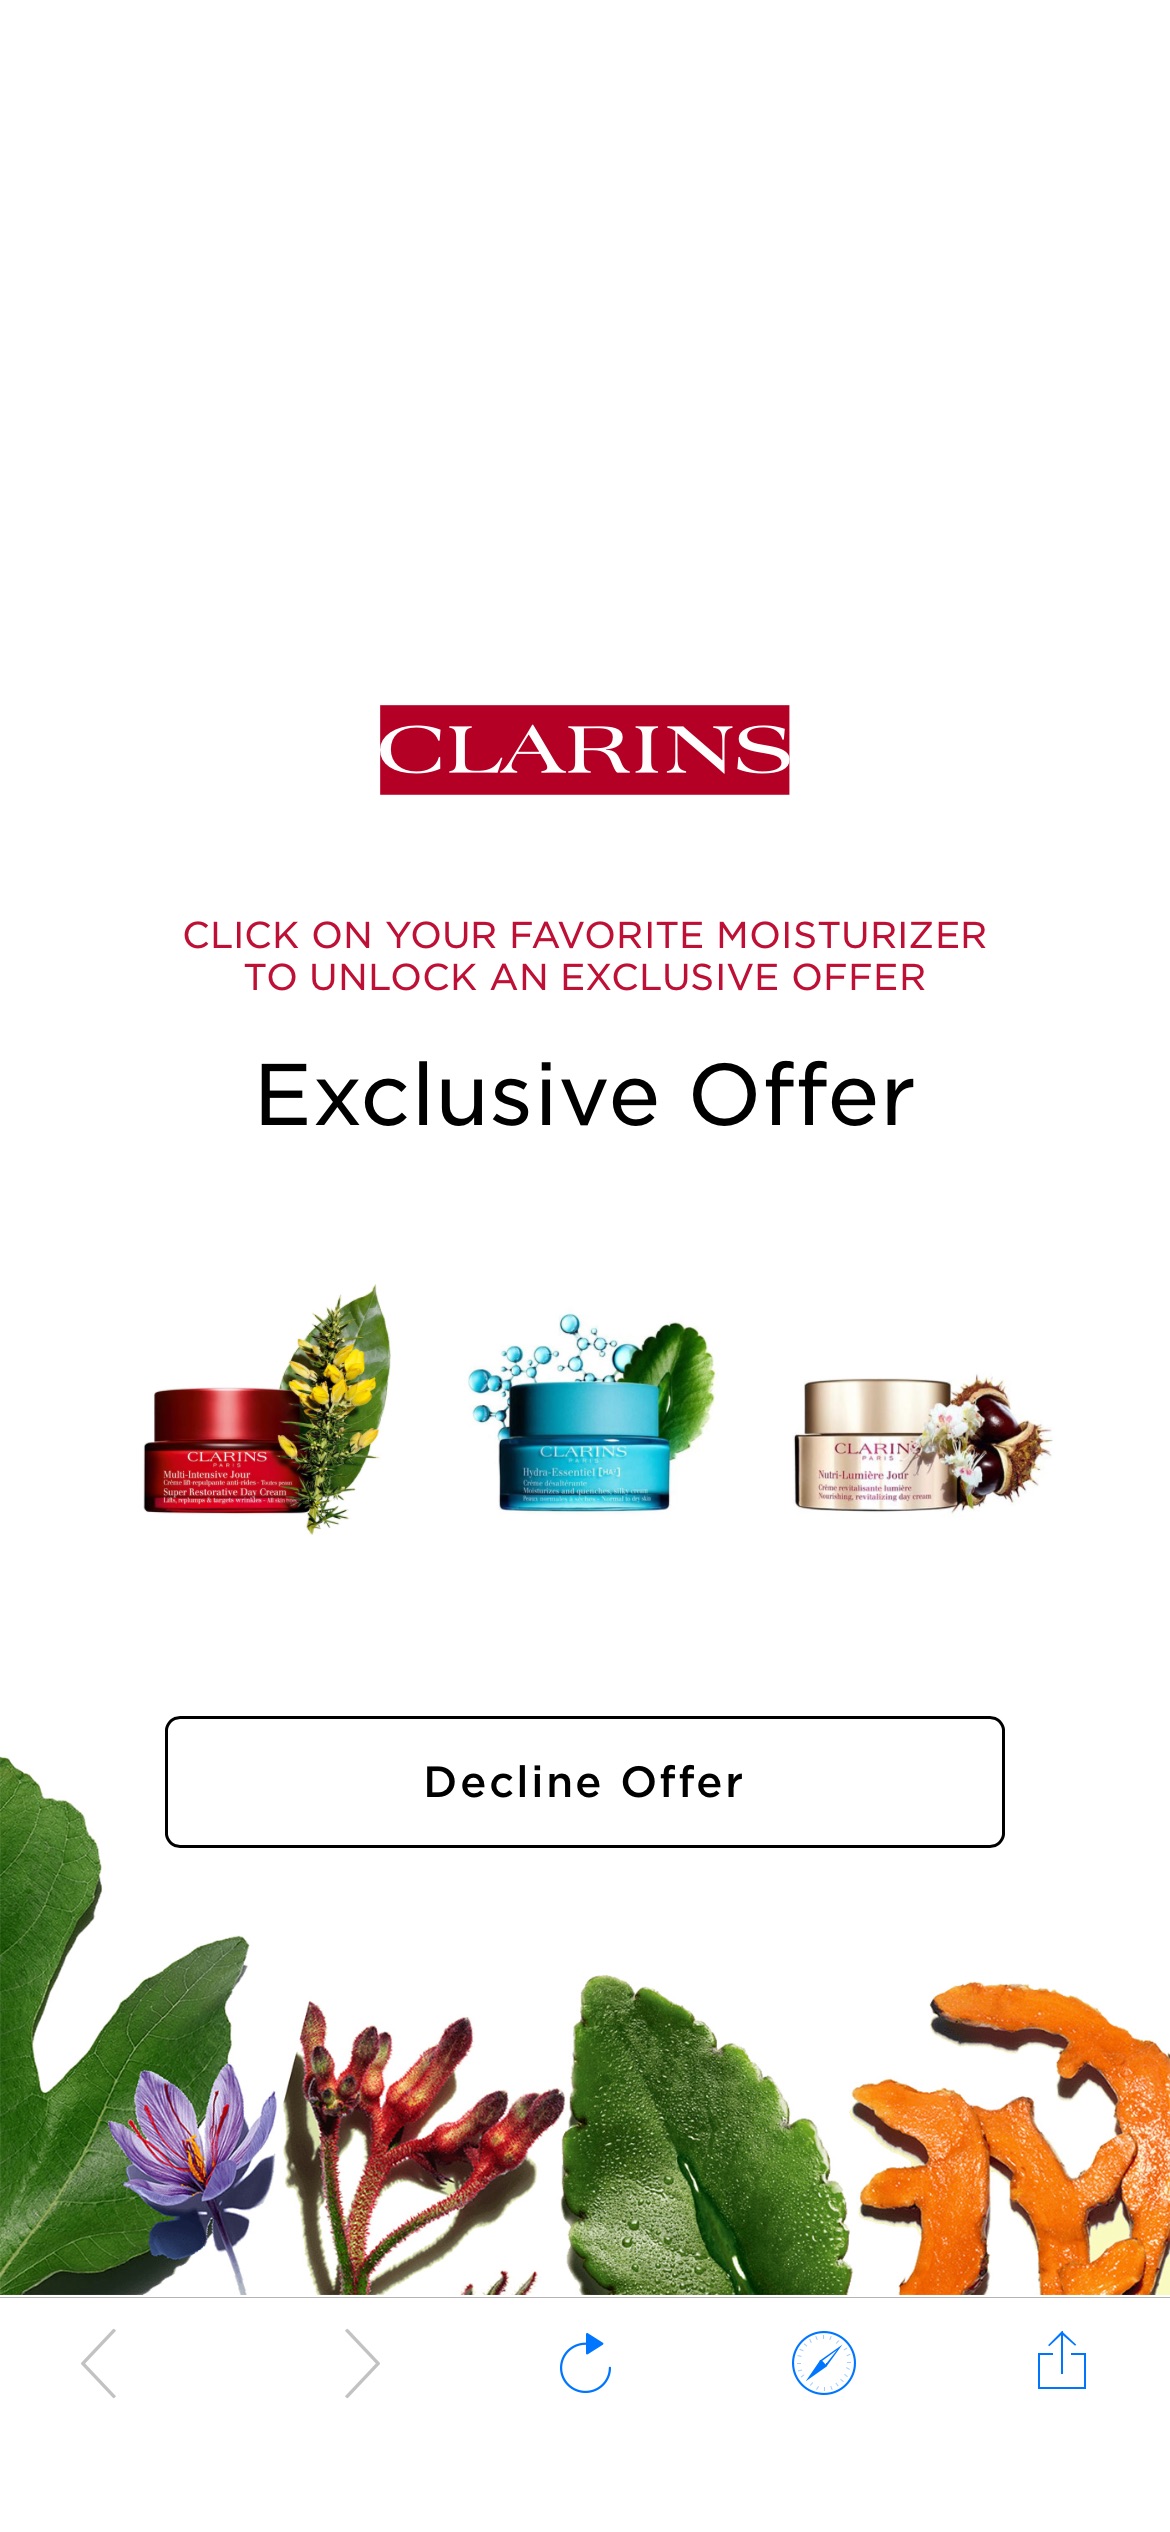 CLARINS®: Natural Beauty, Skincare and Makeup powered by plants.®